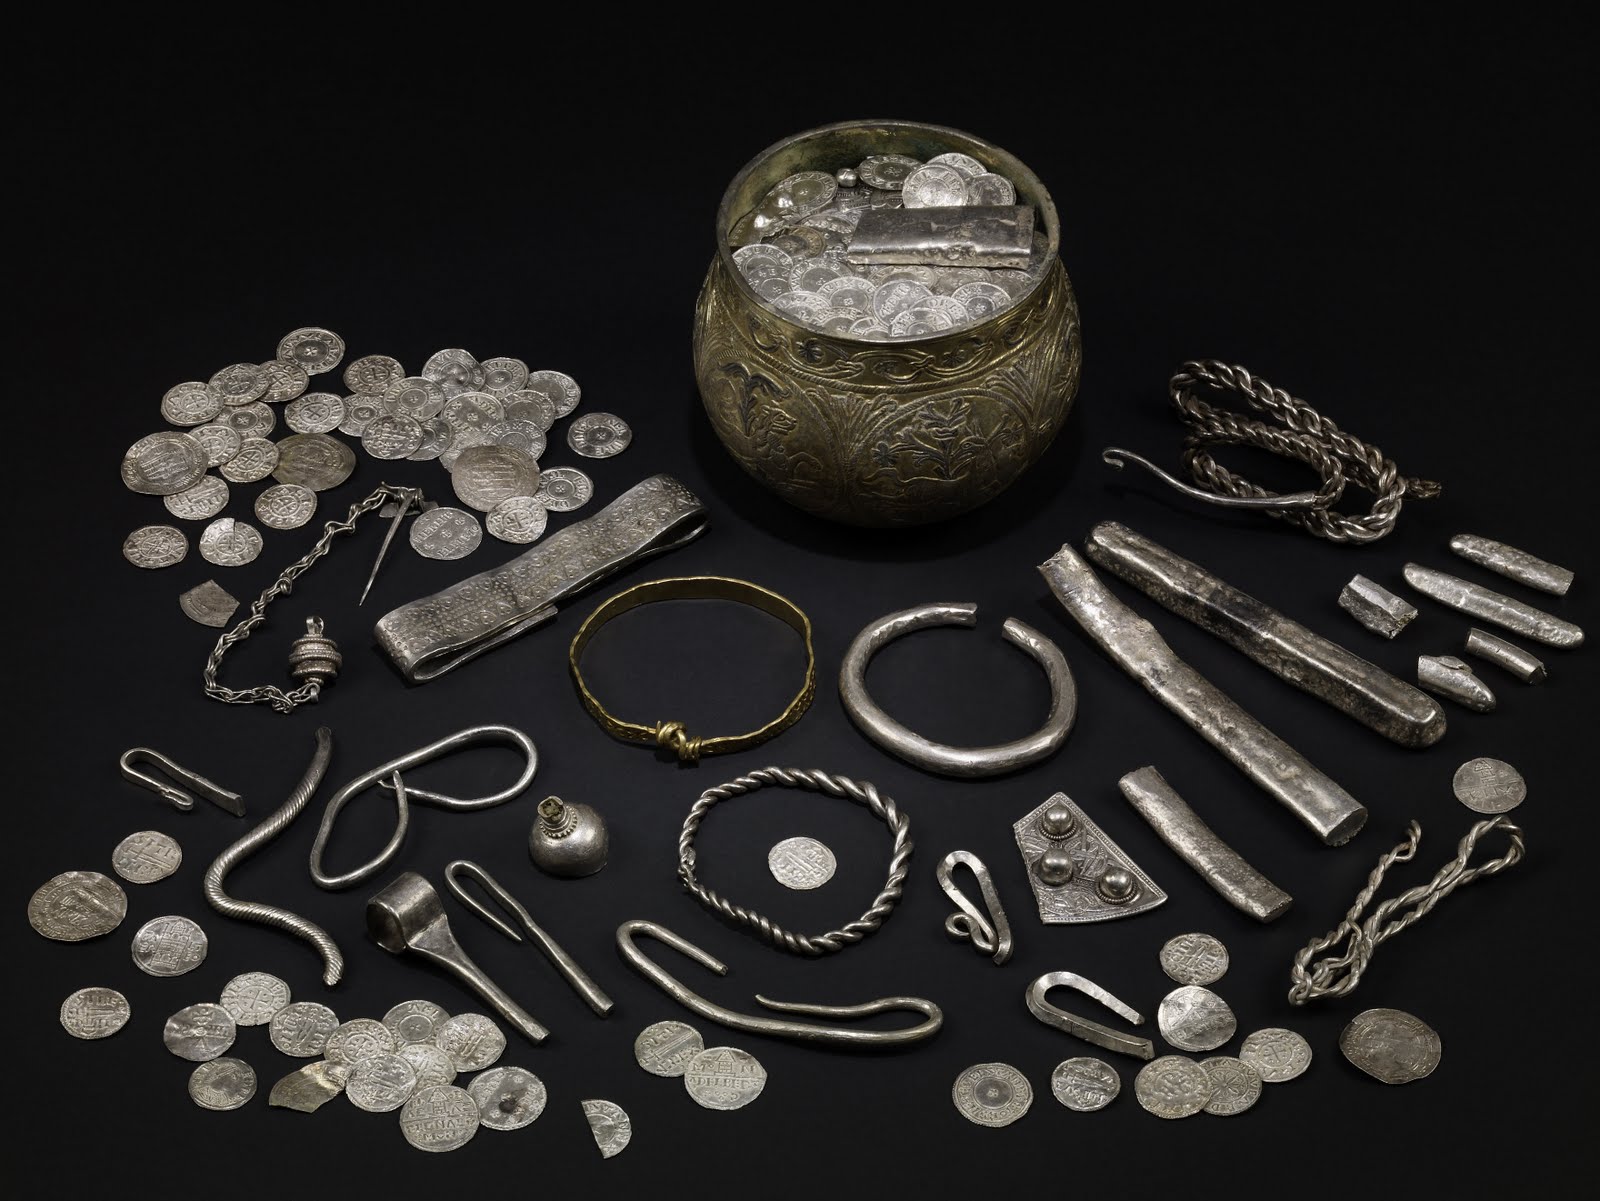 [Objects+from+the+Vale+of+York+Hoard.+The+Vale+of+York+Hoard+has+been+jointly+acquired+by+Yorkshire+Museums+Trust+and+the+British+Museum.+Copyright+the+Trustees+of+the+British+Museum.jpg]